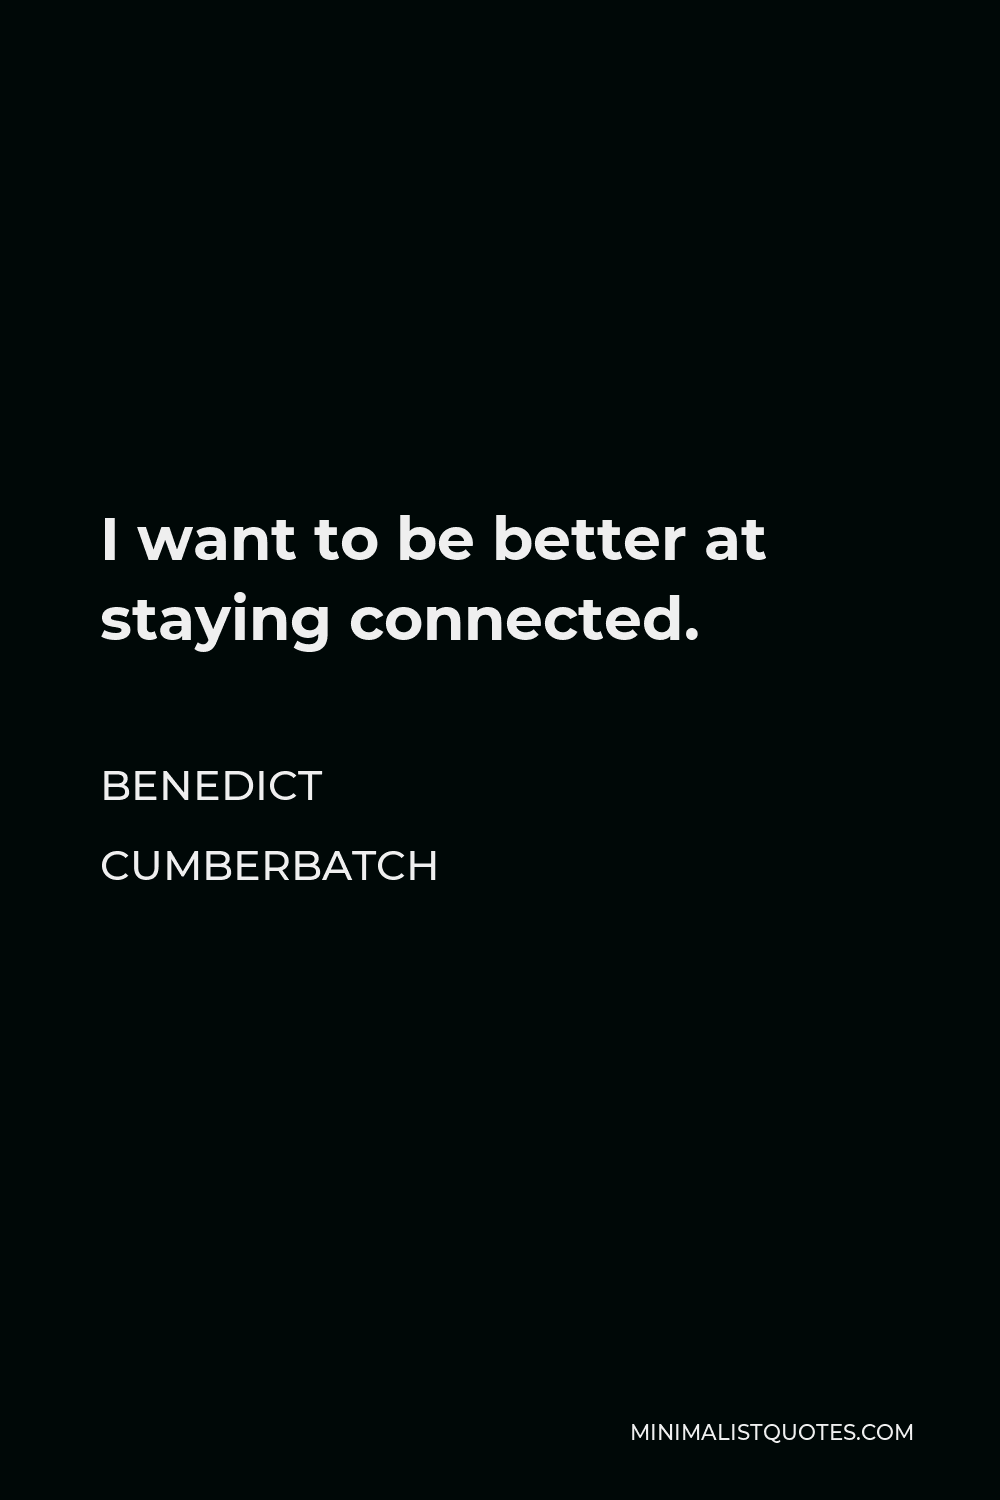 Benedict Cumberbatch Quote - I want to be better at staying connected.